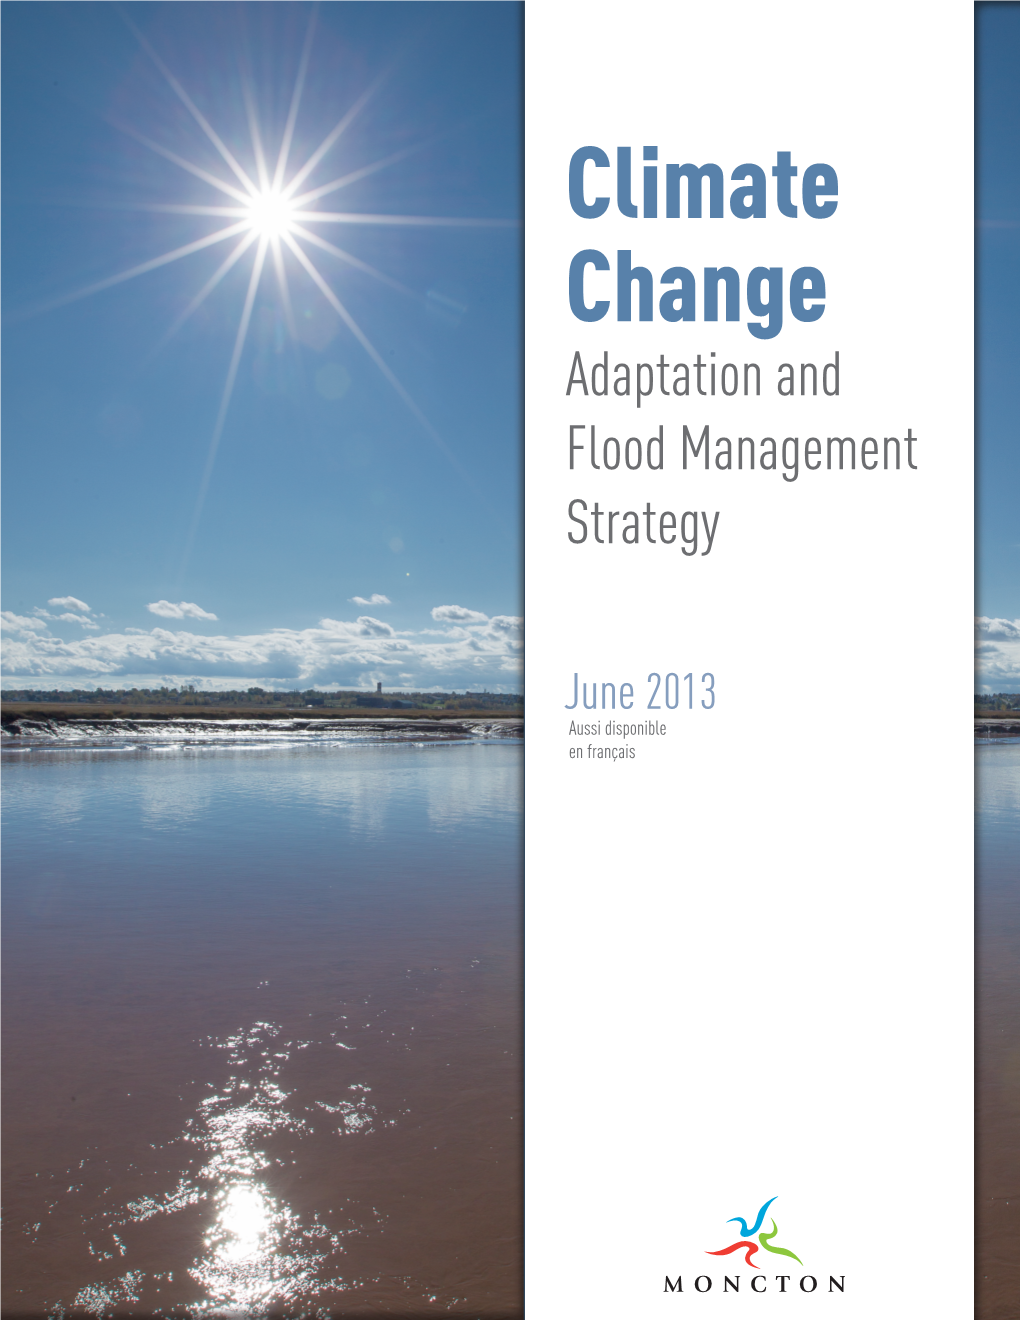 Moncton Climate Change Adaptation and Flood Management Strategy: Action Plan Schedule